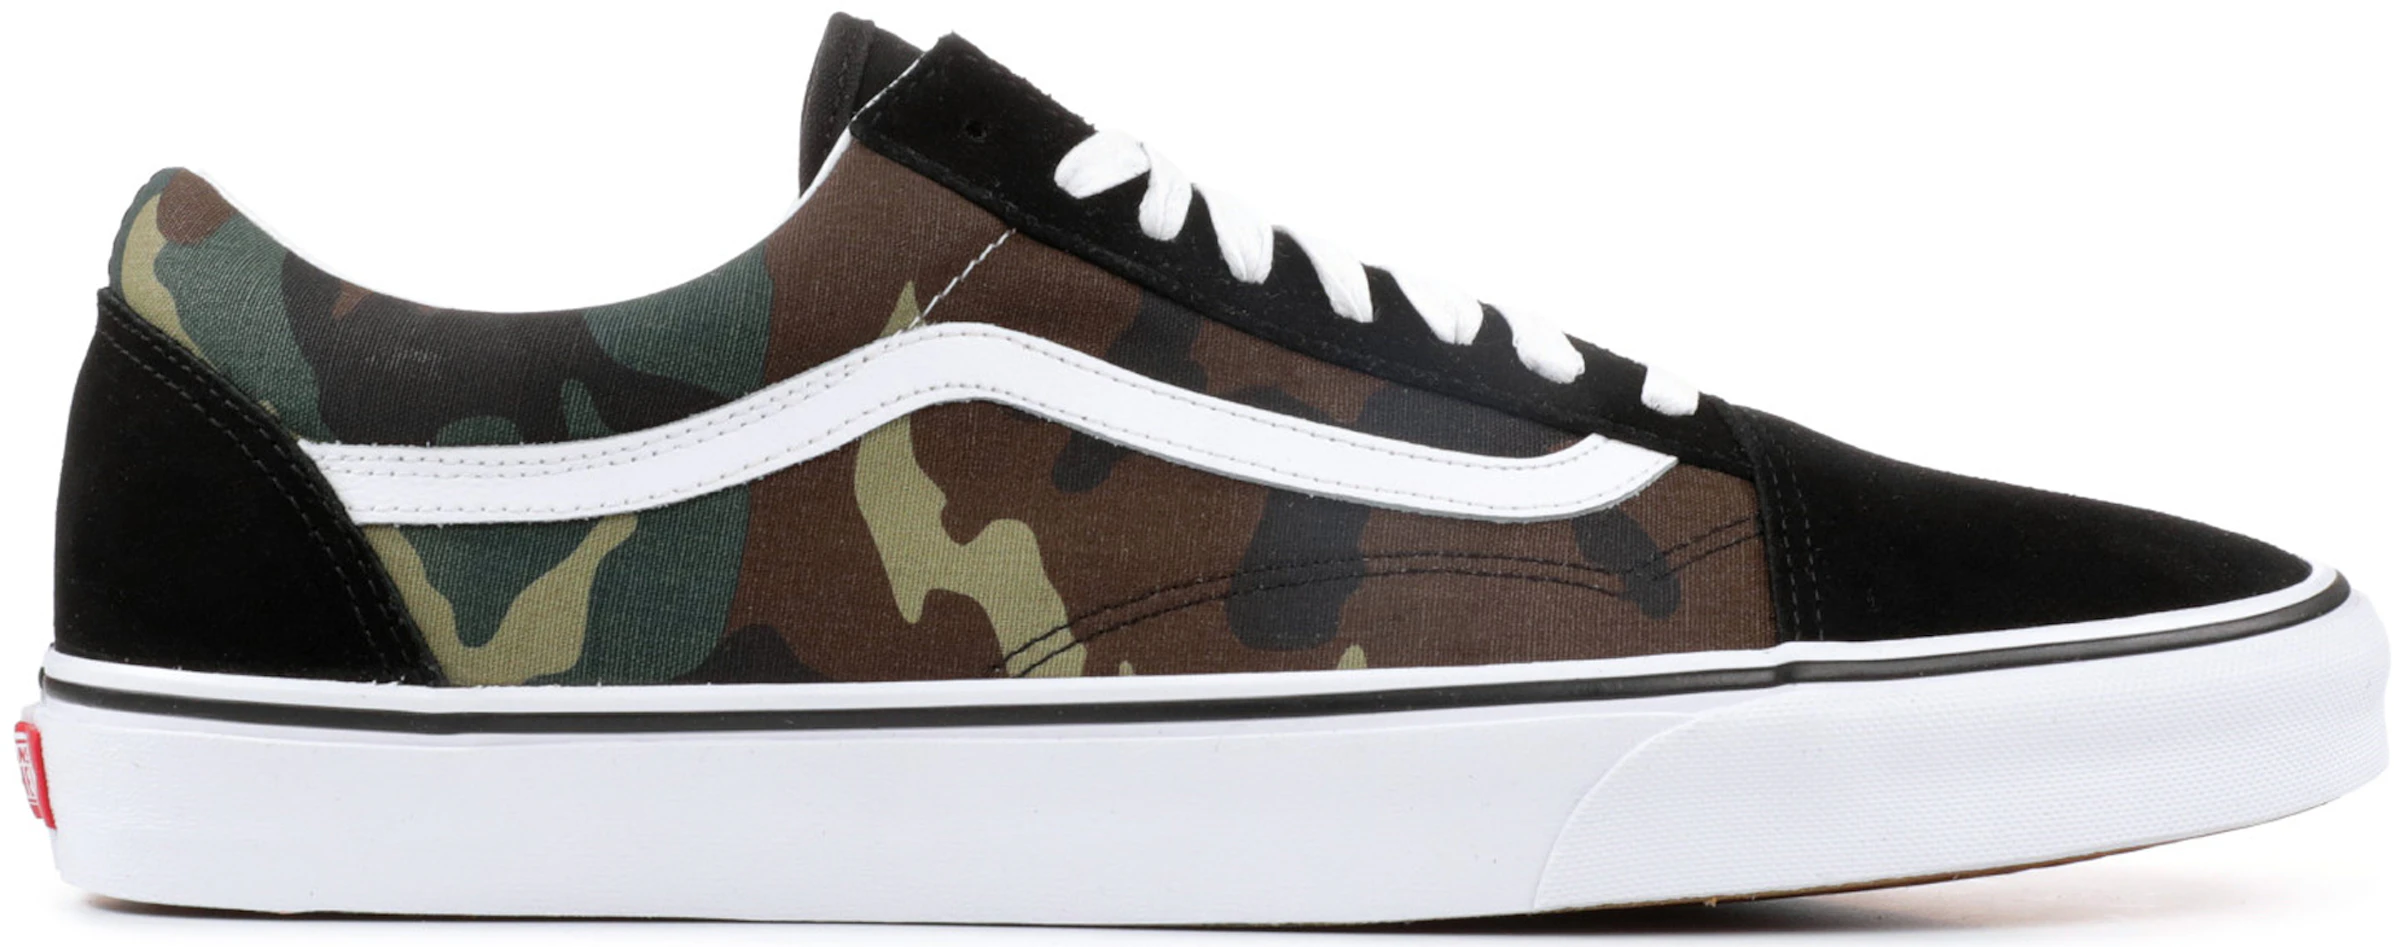 Vans Old Skool Woodland Camo VN0A38G1NRA US | atelier-yuwa.ciao.jp